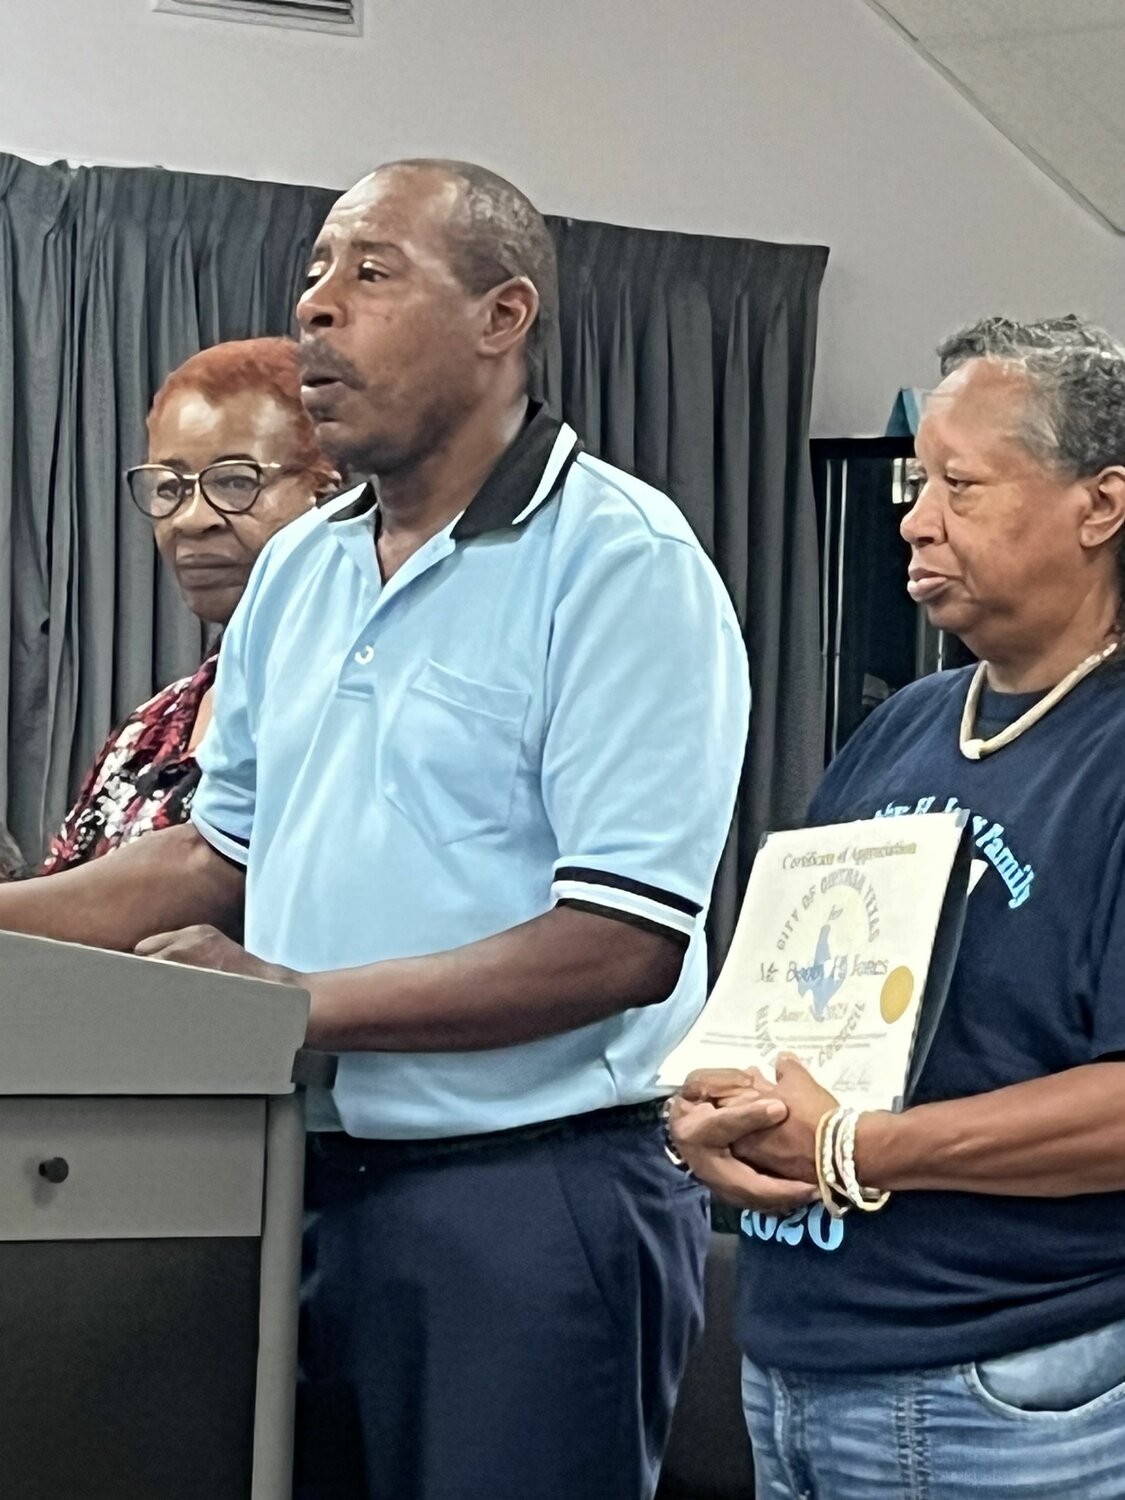 Alvin Jones (center) is flanked by his sister Barbara Berry (left) and step-mother Nita Jones (right) as he addresses the Quitman City Council on the recognition of his father, the late Rev. Bobby Jones who was awarded a certificate of appreciation from the City of Quitman at last Thursday’s city council meeting.